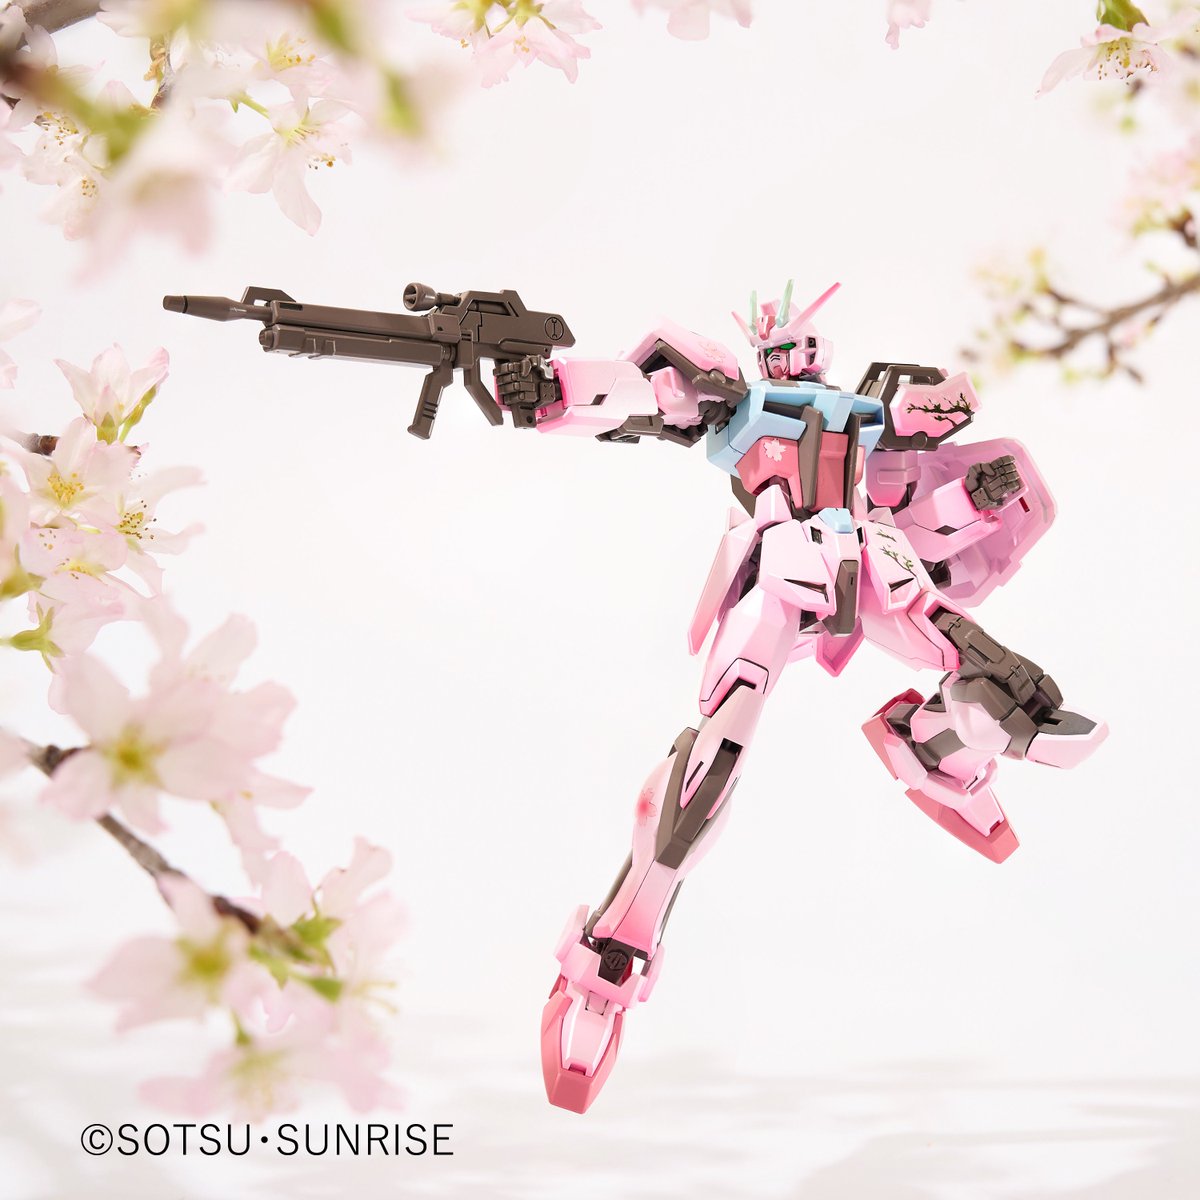 Customize your own GUNPLA with GSI Creos paint!

Check out our spring and cherry blossom version ENTRY GRADE 1/144 STRIKE GUNDAM 

For more details about these paints, please visit the site below!
mr-hobby.com/en/index.html

#Gunpla #Gundam #plasticmodel #MrHobby